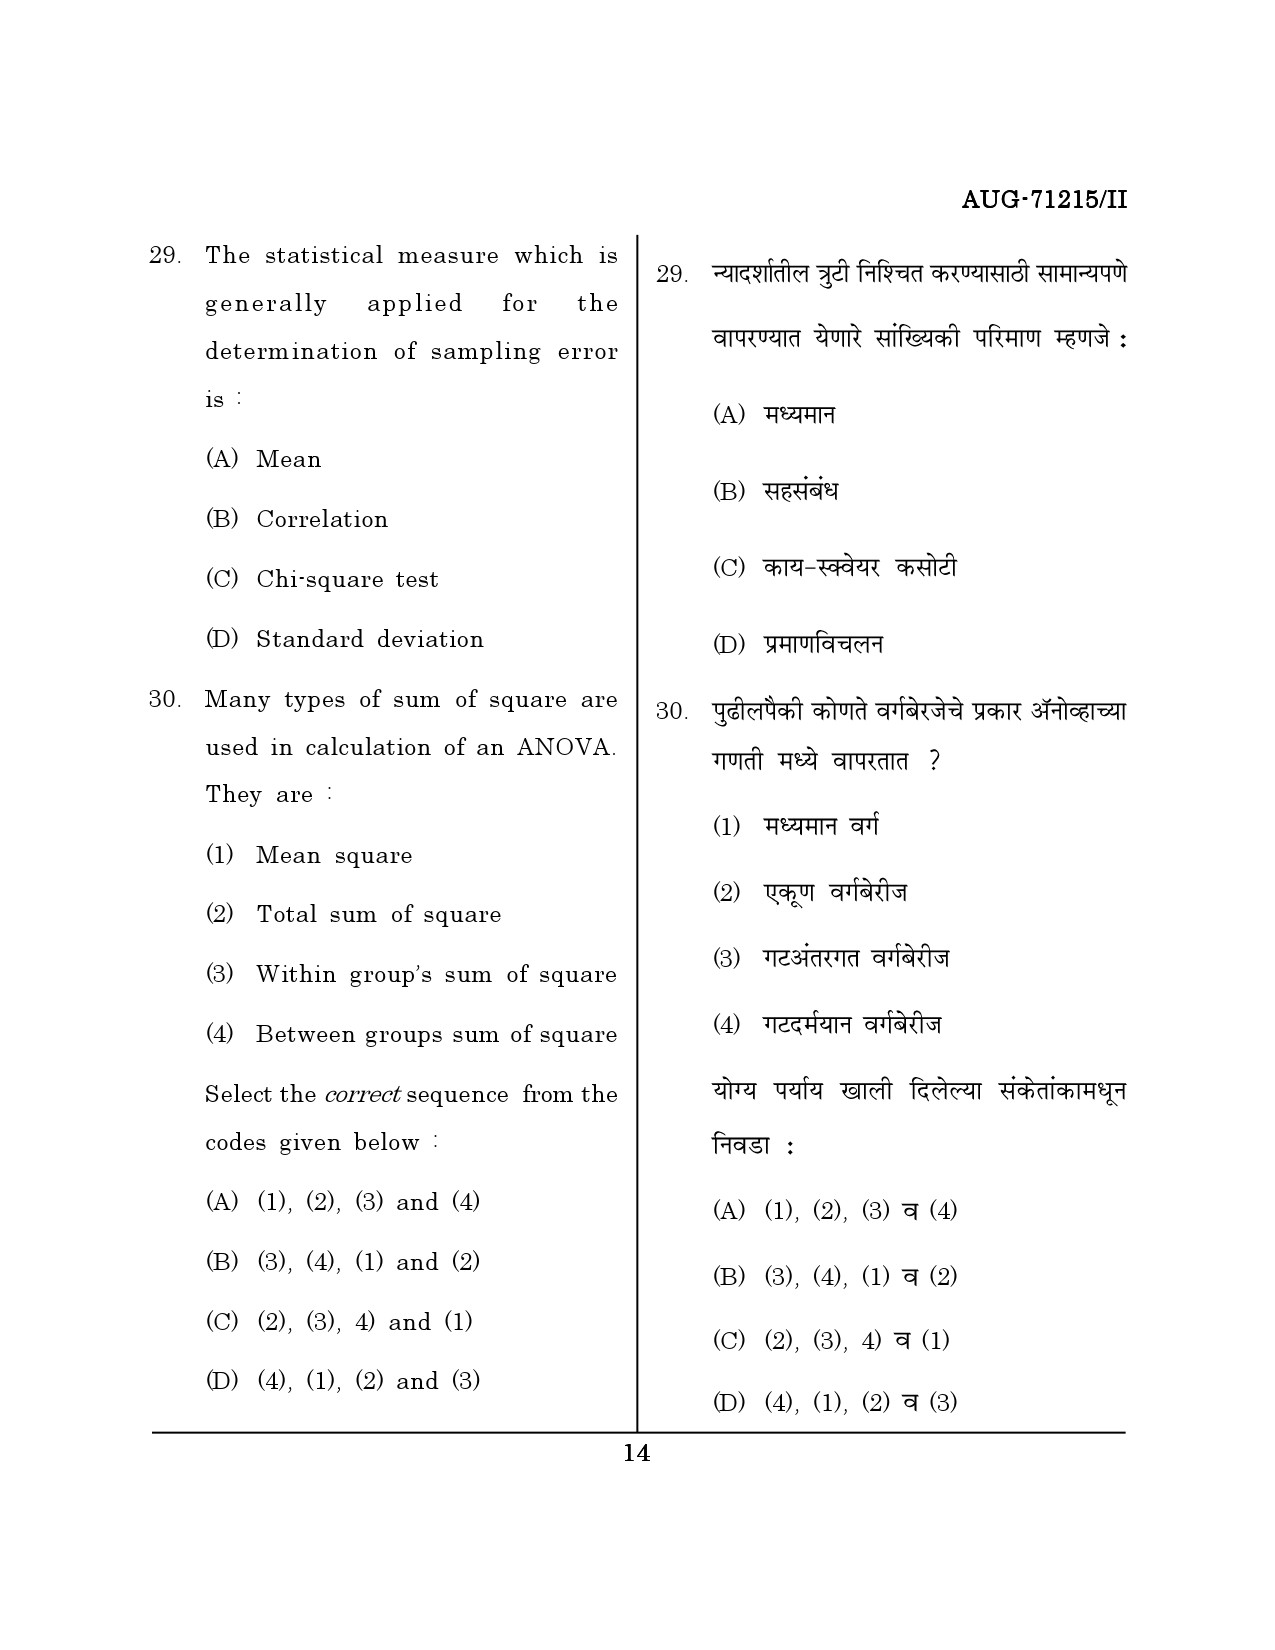 Maharashtra SET Physical Education Question Paper II August 2015 13